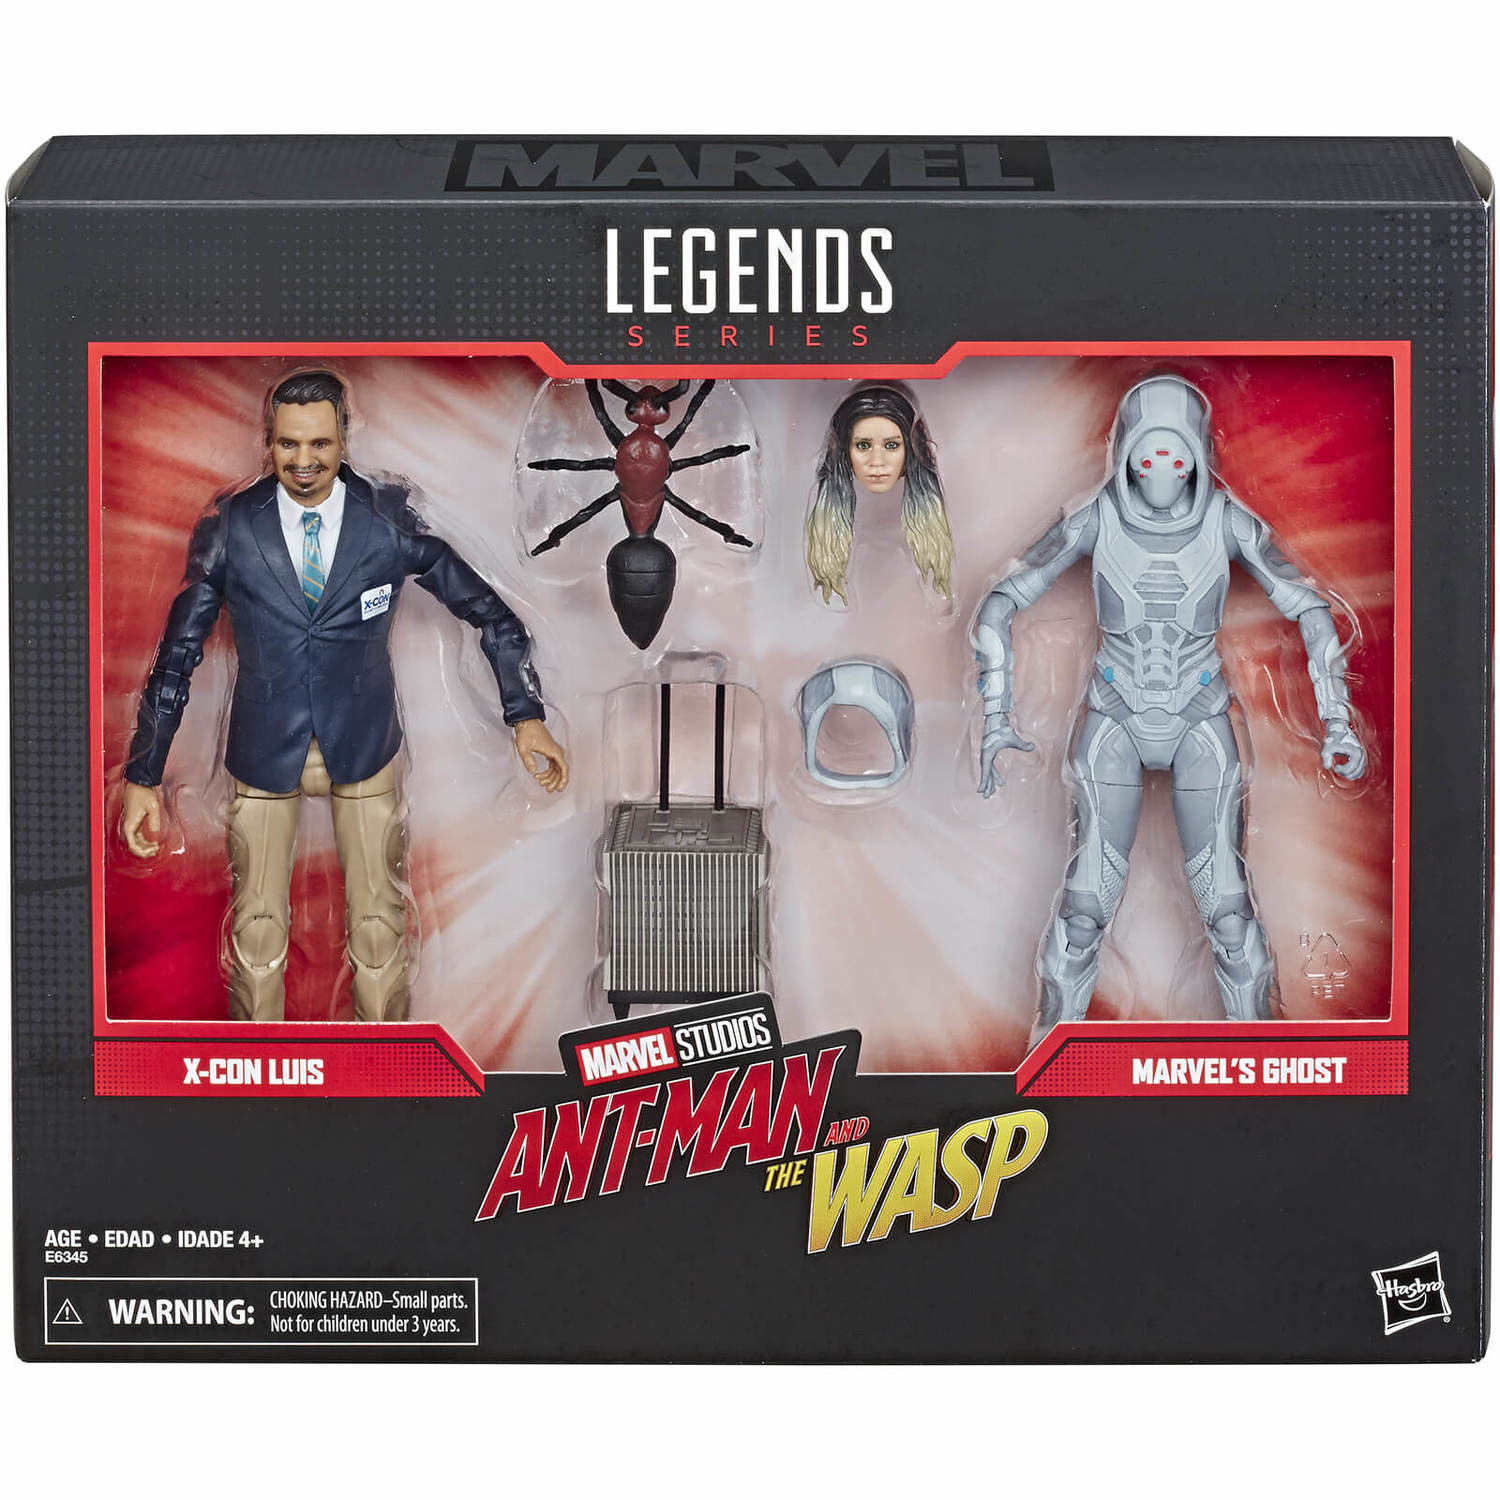 ant man and the wasp ghost action figure